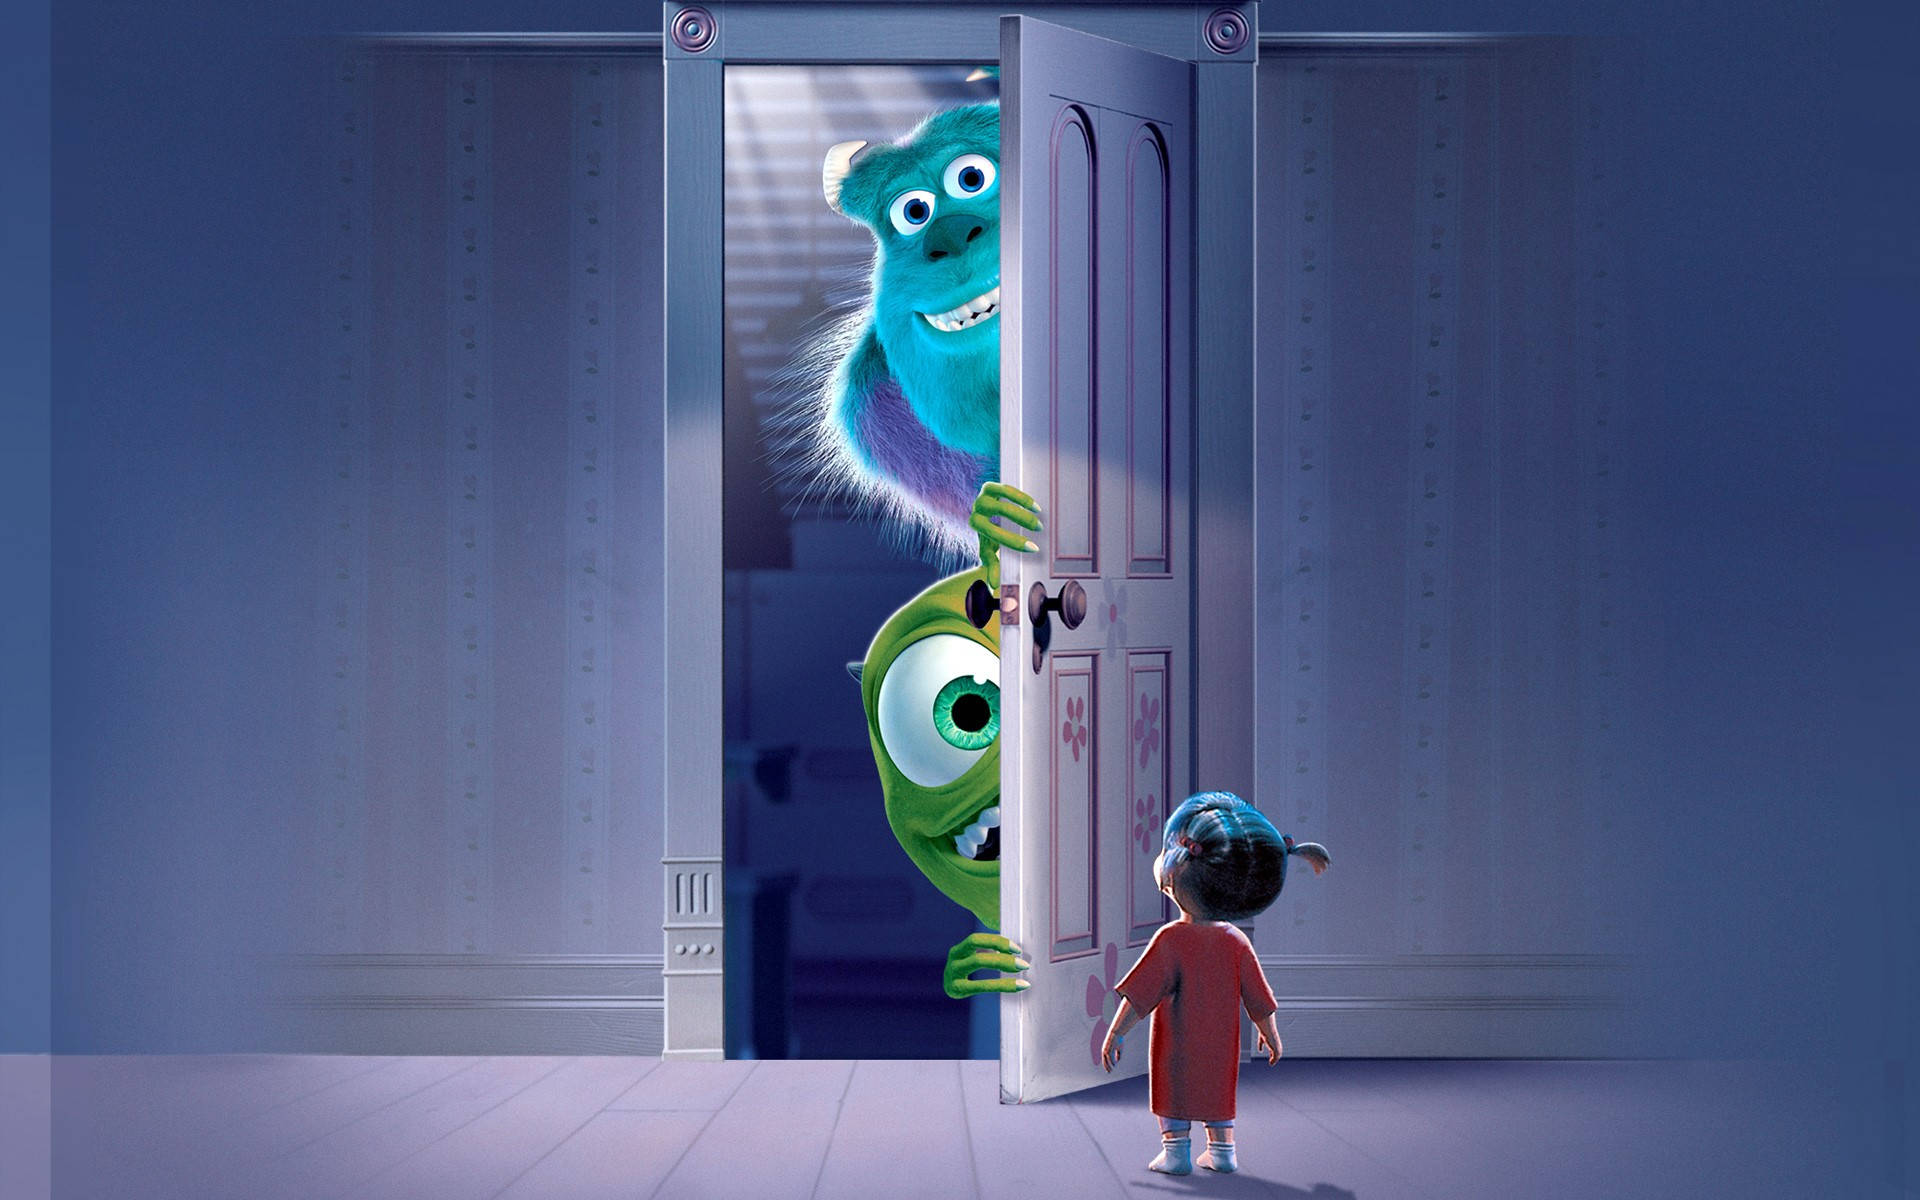 Caption: Boo, Sulley, and Mike from Monsters Inc. in an Adventurous Day Wallpaper